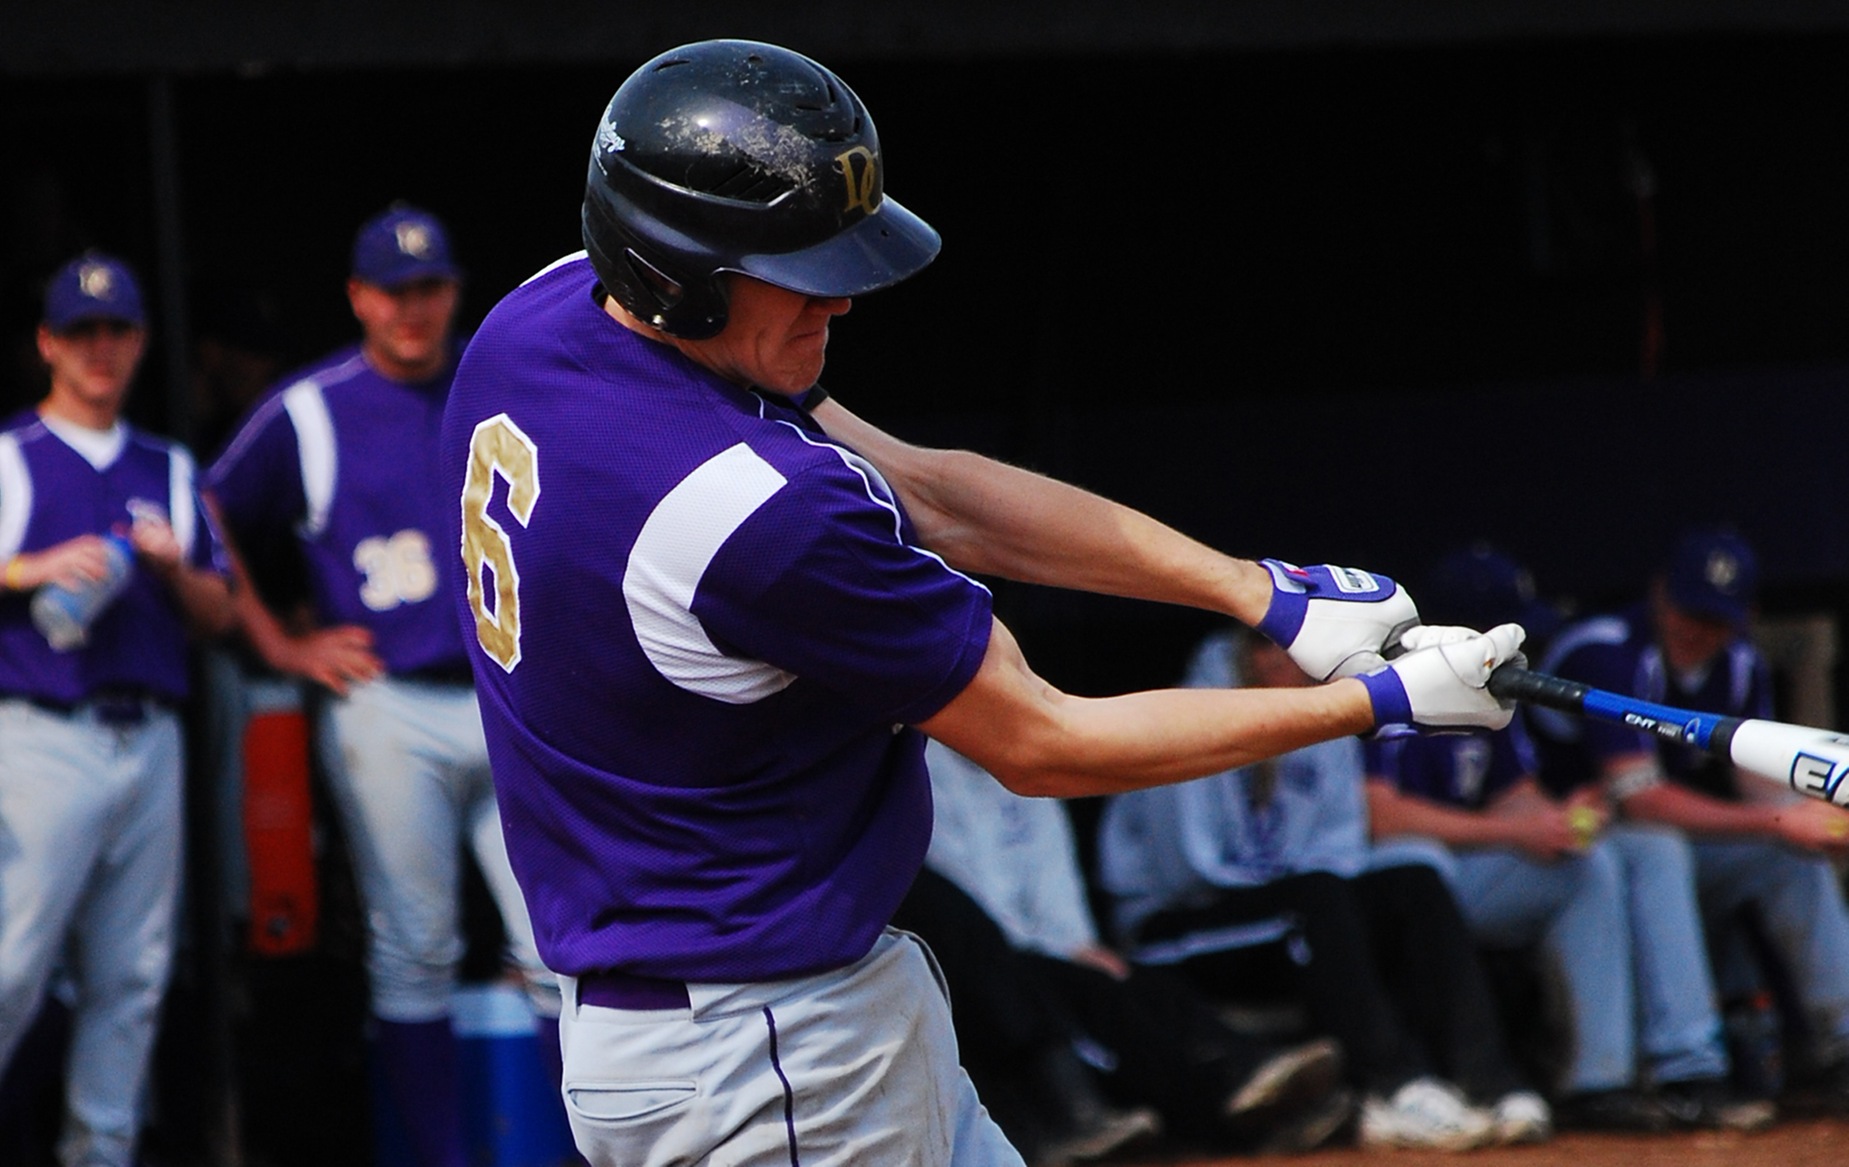 DC Blanked in HCAC Opener at Franklin